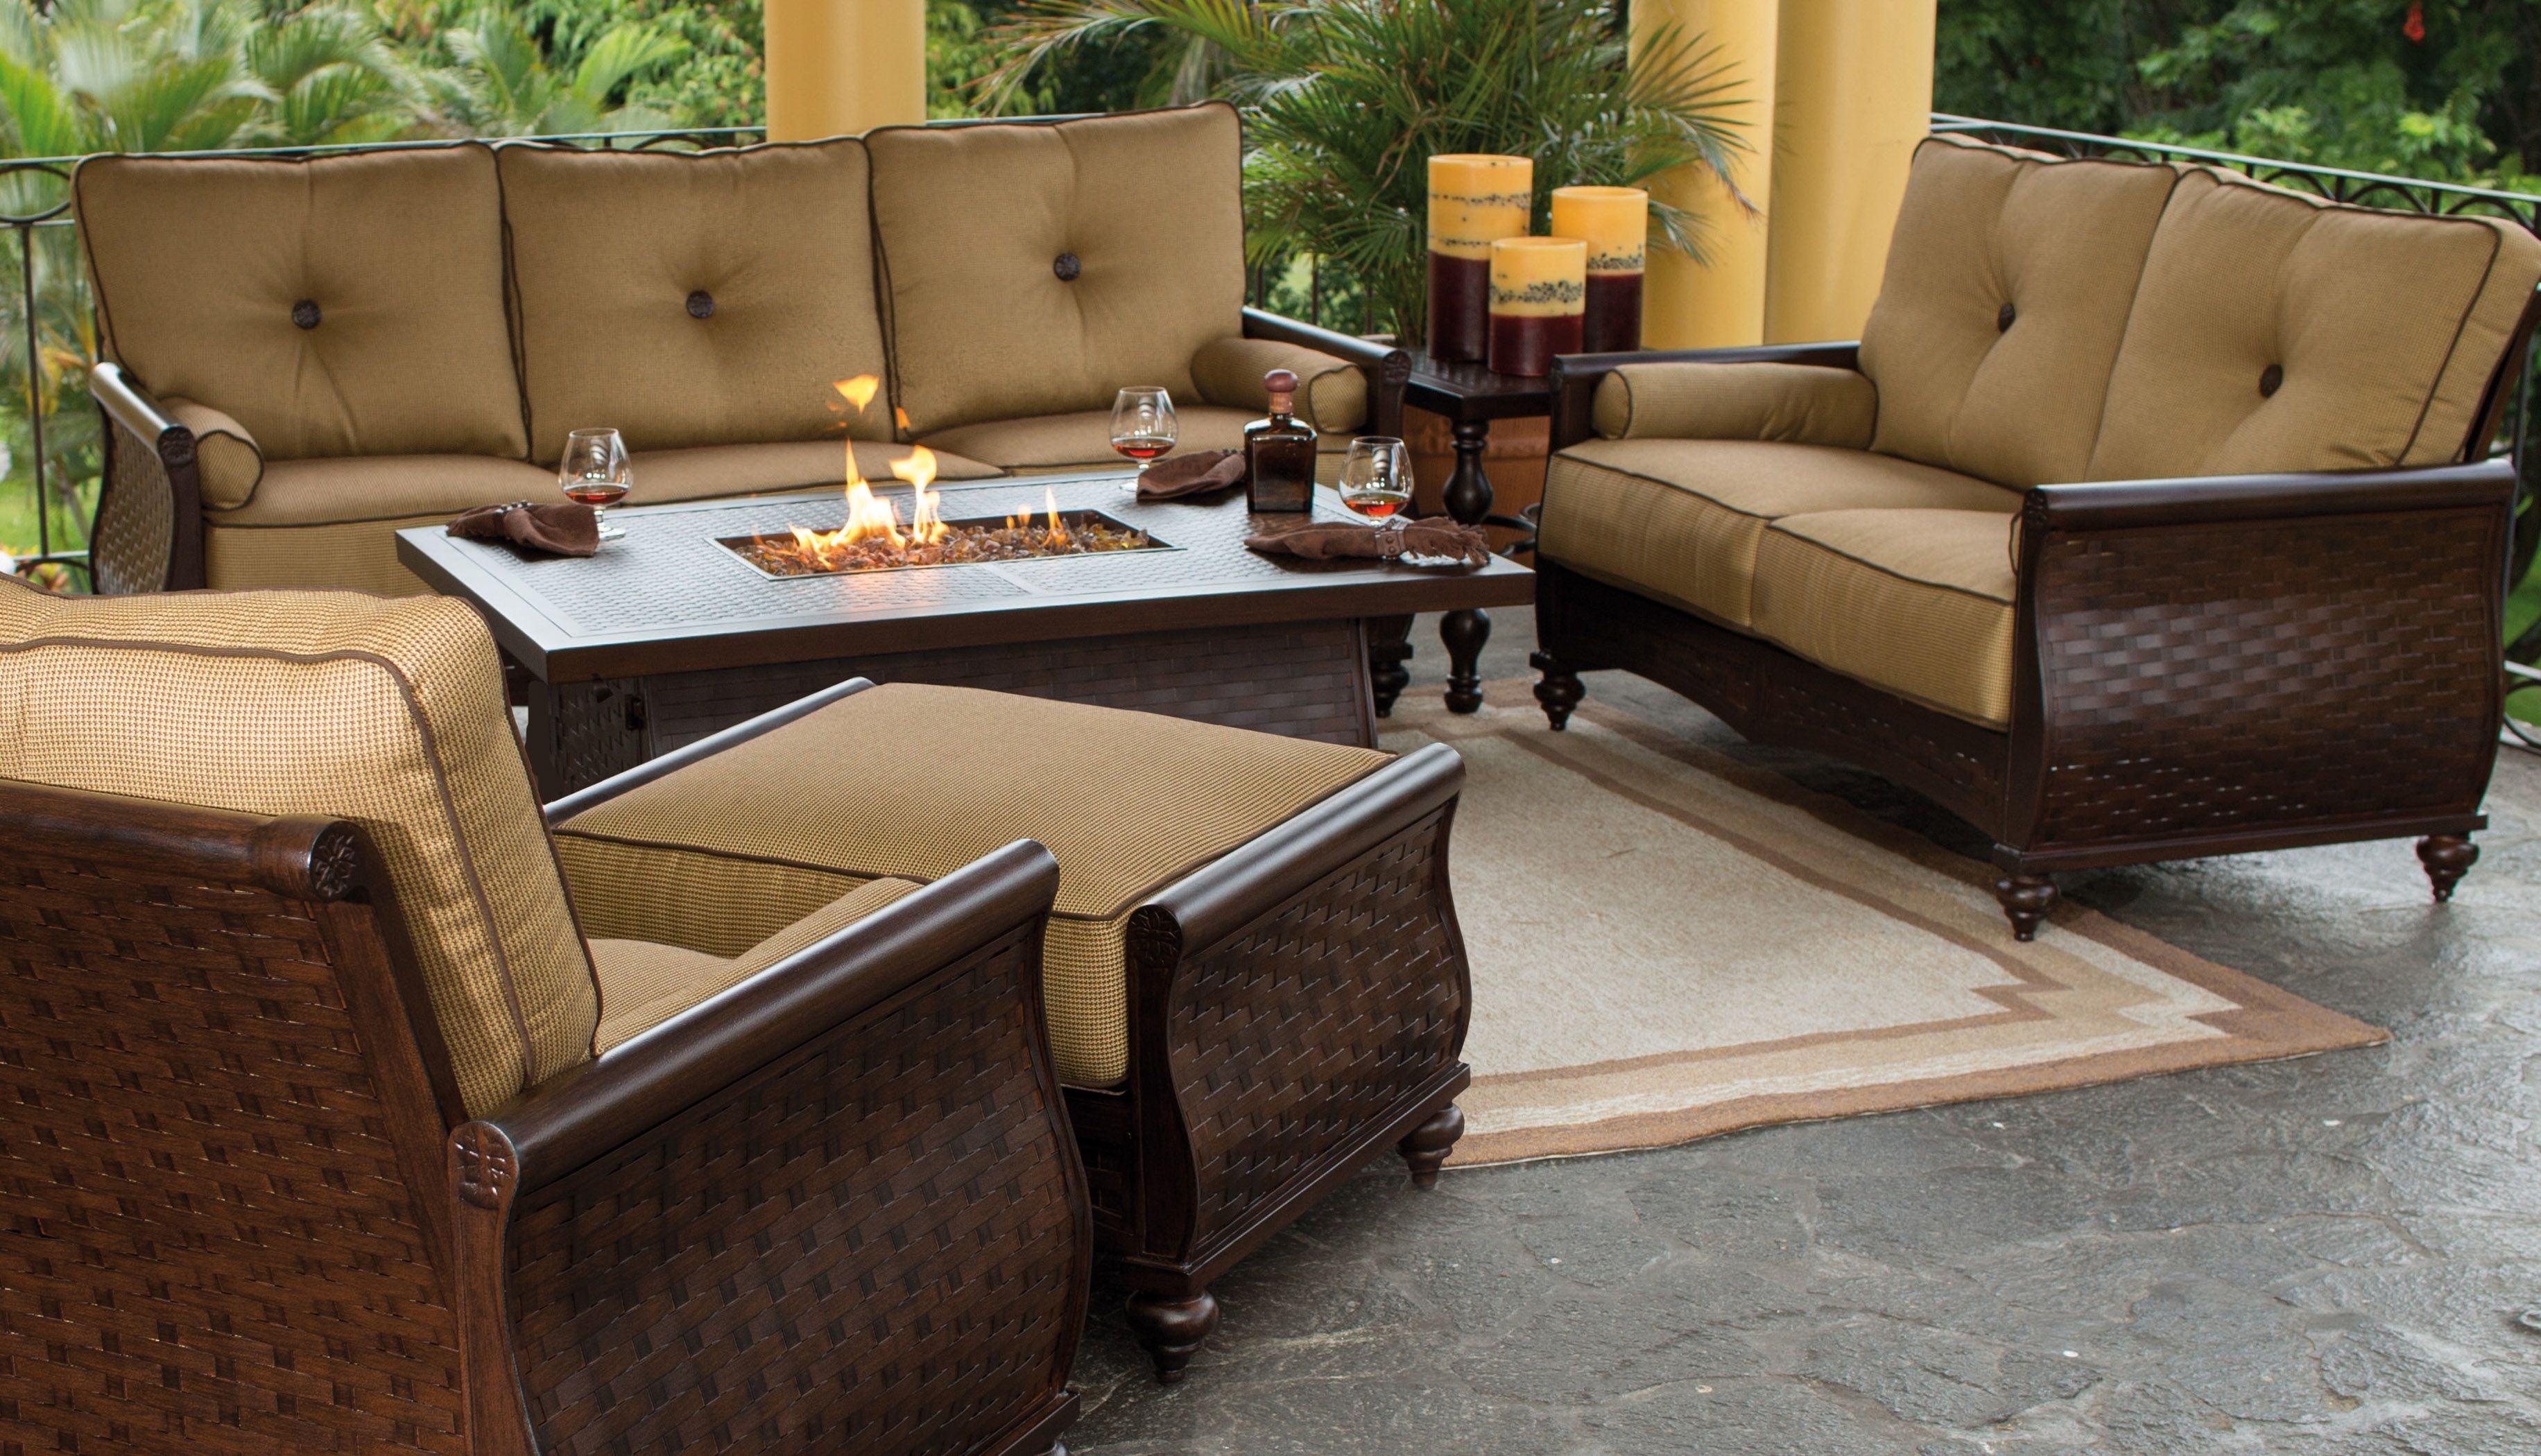 Double Chaise Lounge With Most Recent High End Patio Umbrellas (View 1 of 20)